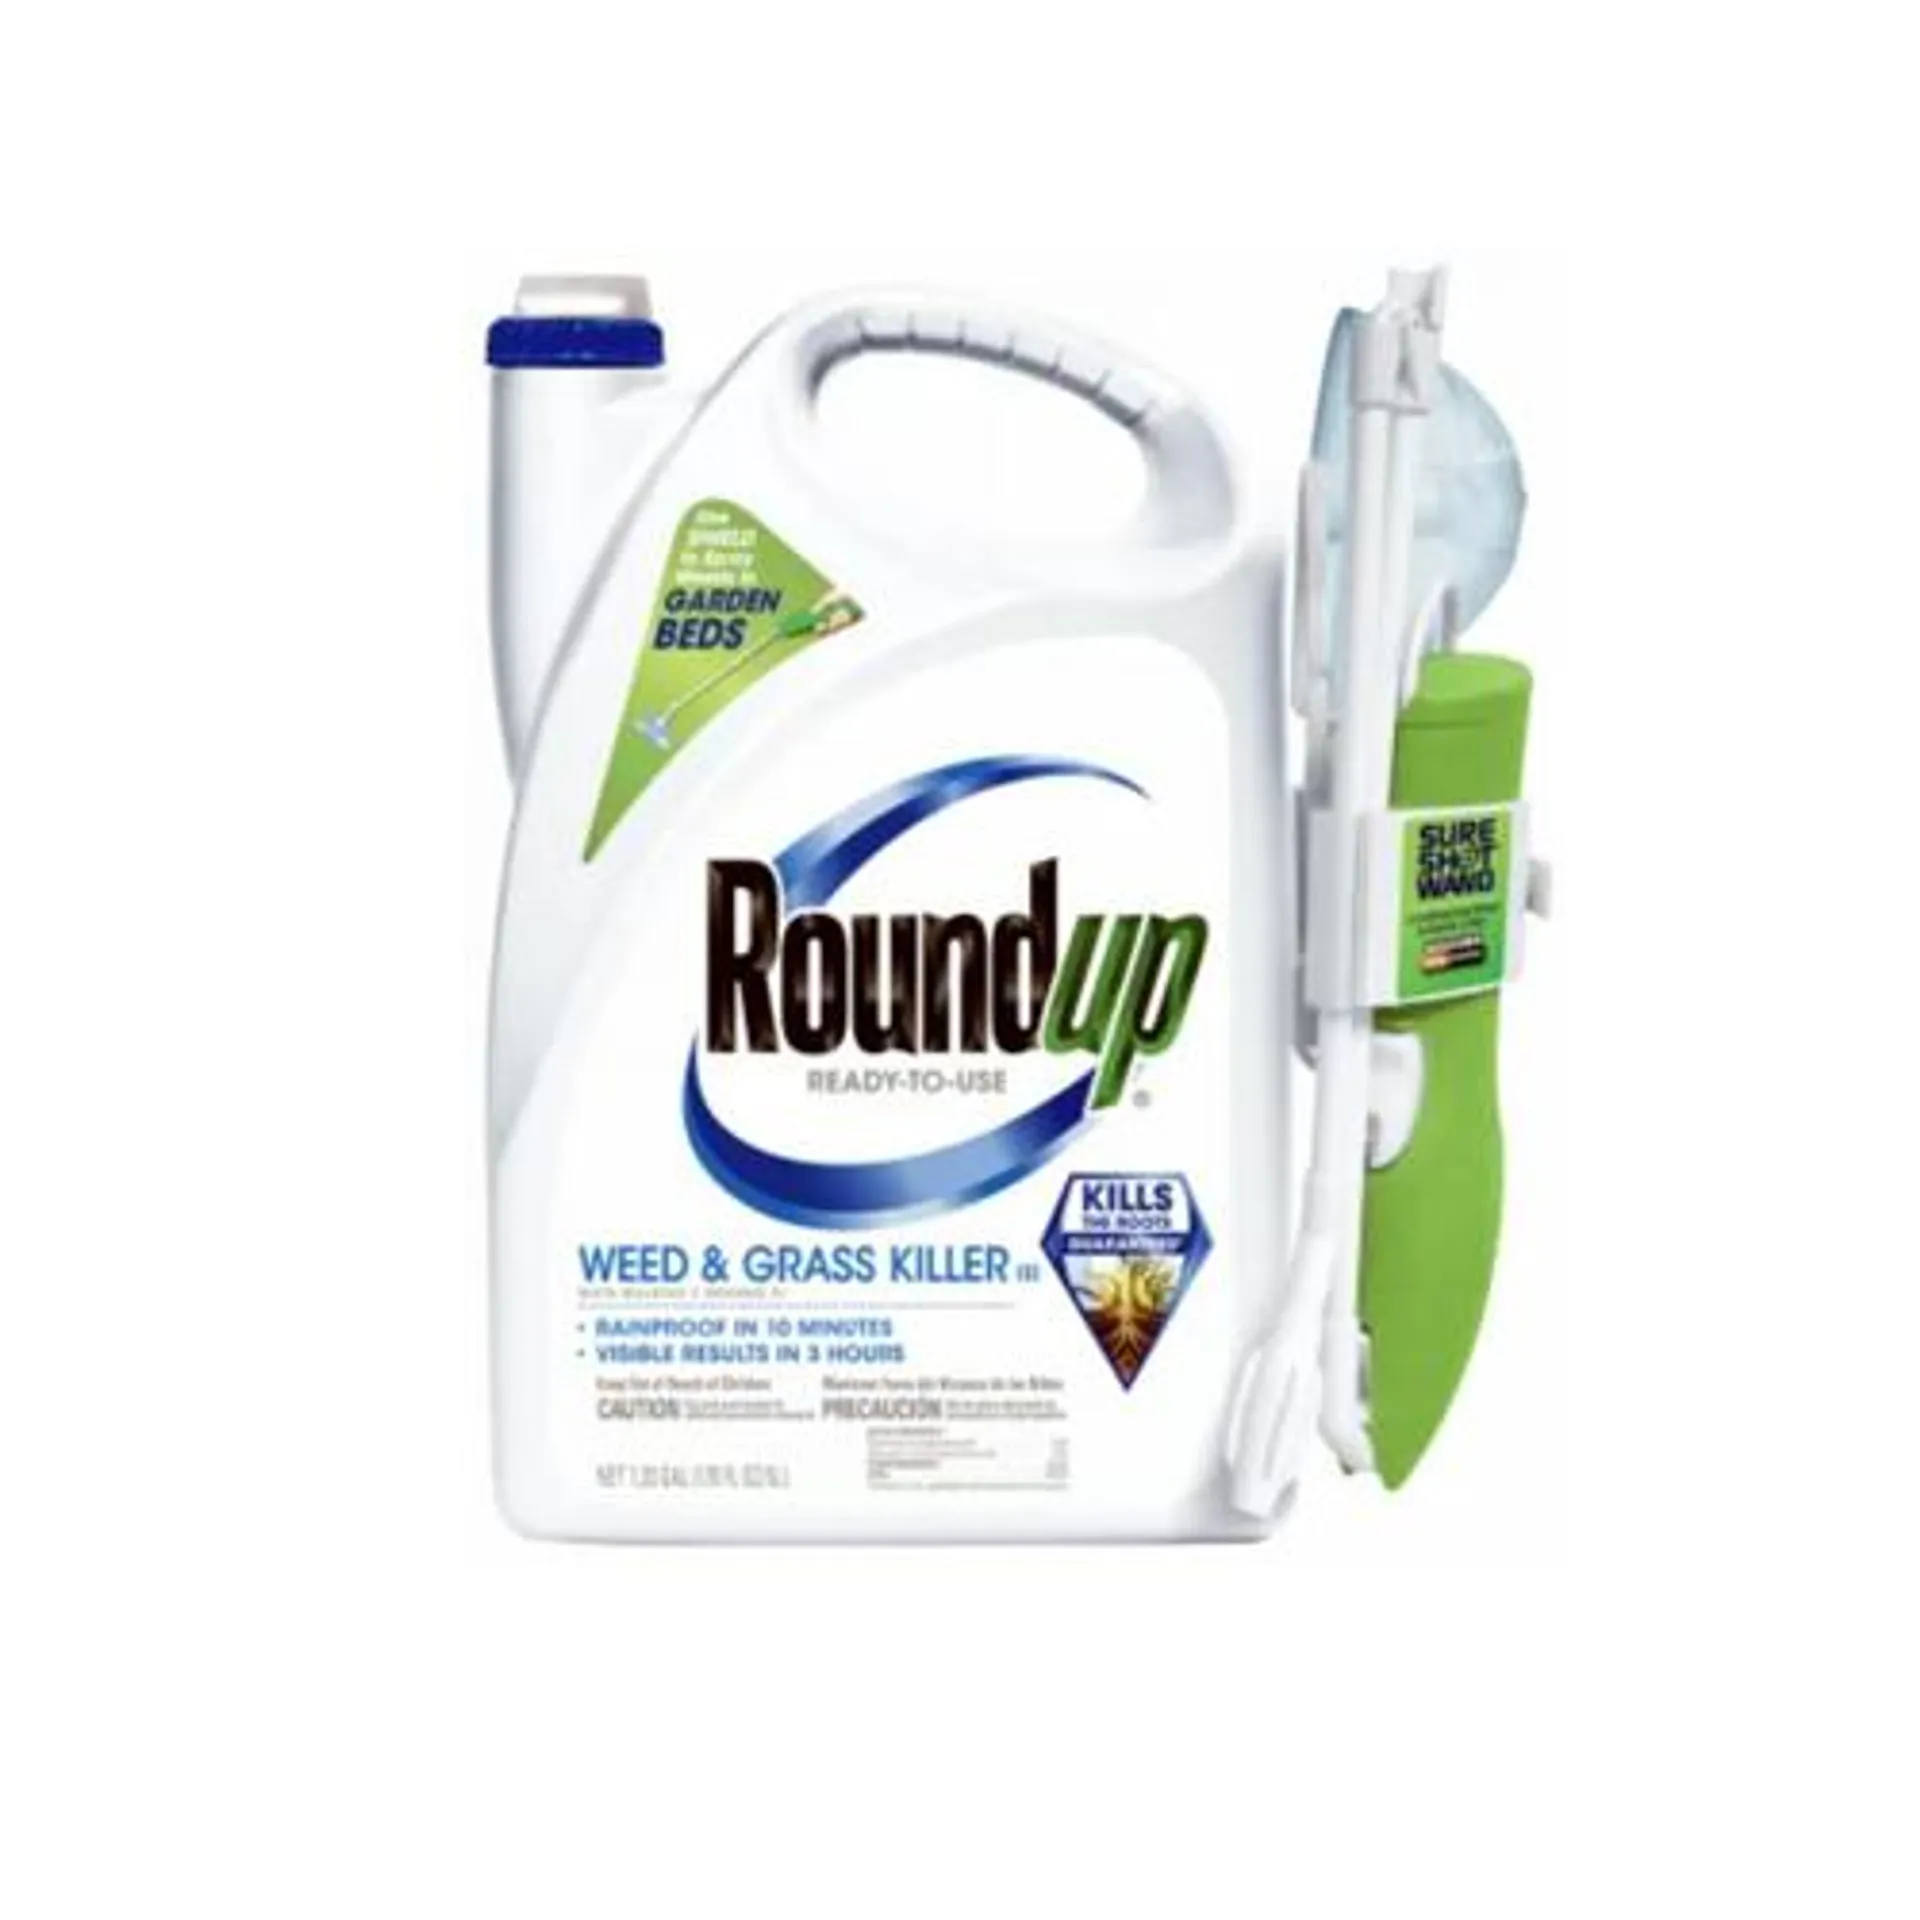 RoundUp Ready-to-Use Weed & Grass Killer- 1.33 Gal